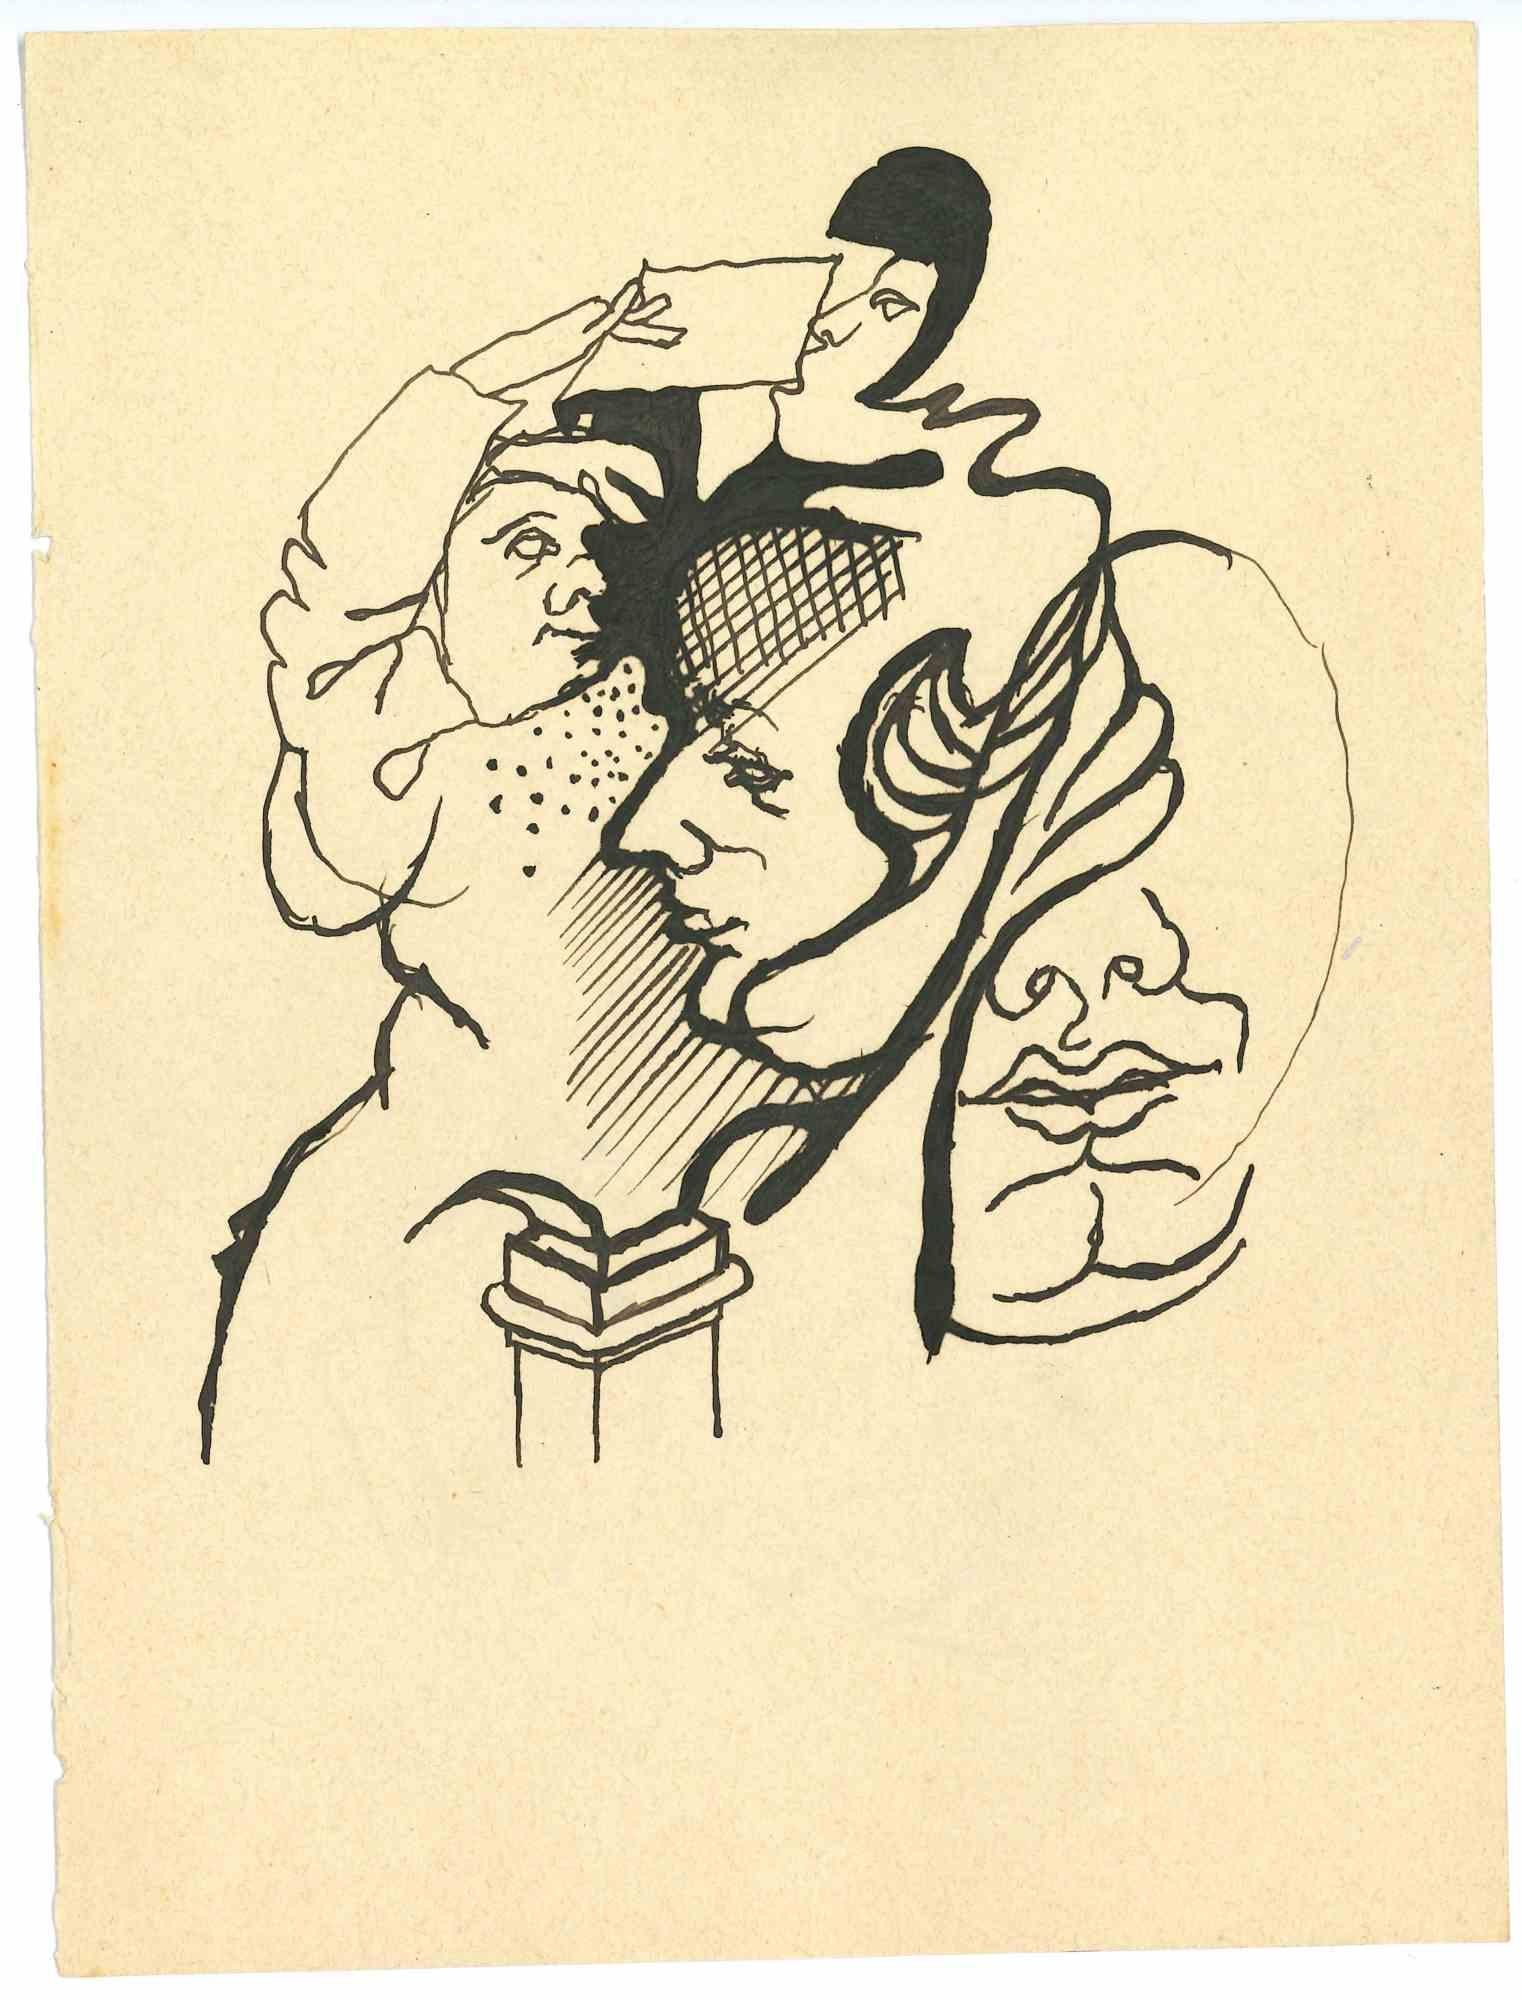 The Figures is an Original Drawing in china ink on creamy-colored paper realized by Mino Maccari in the mid-20th century.

Good conditions.

Mino Maccari (1898-1989) was an Italian writer, painter, engraver, and journalist, winner the Feltrinelli